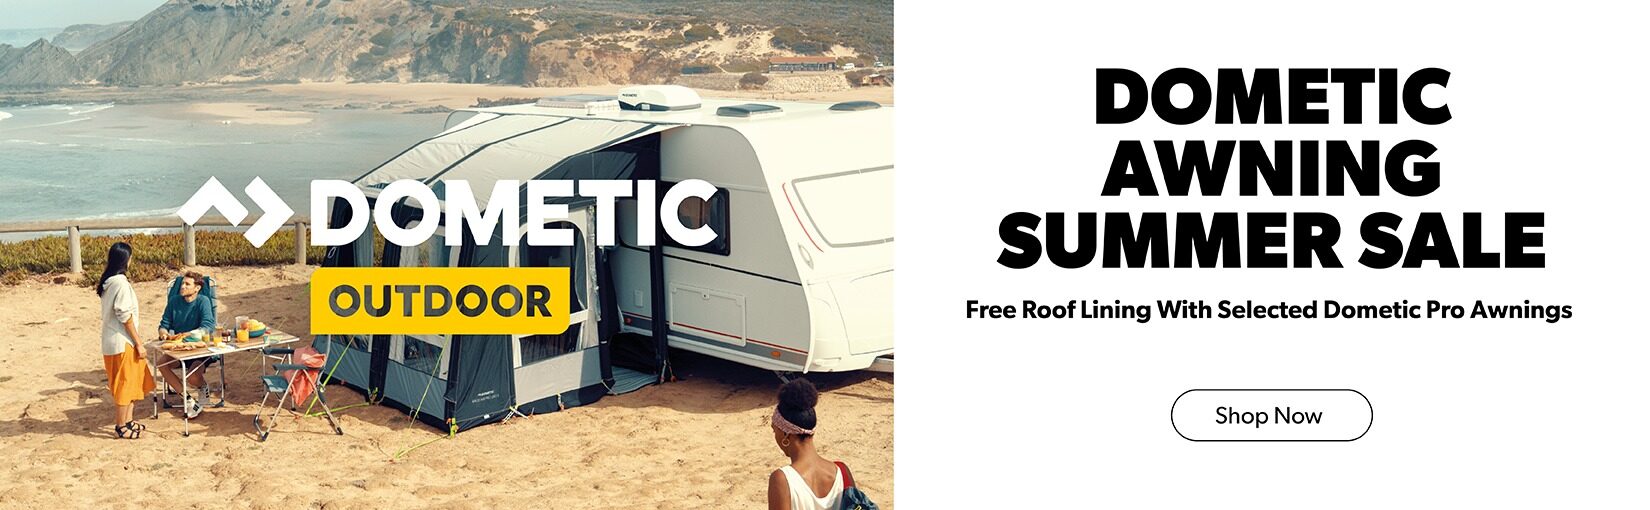 2022 Dometic Awning Summer Sale Norwich Camping B